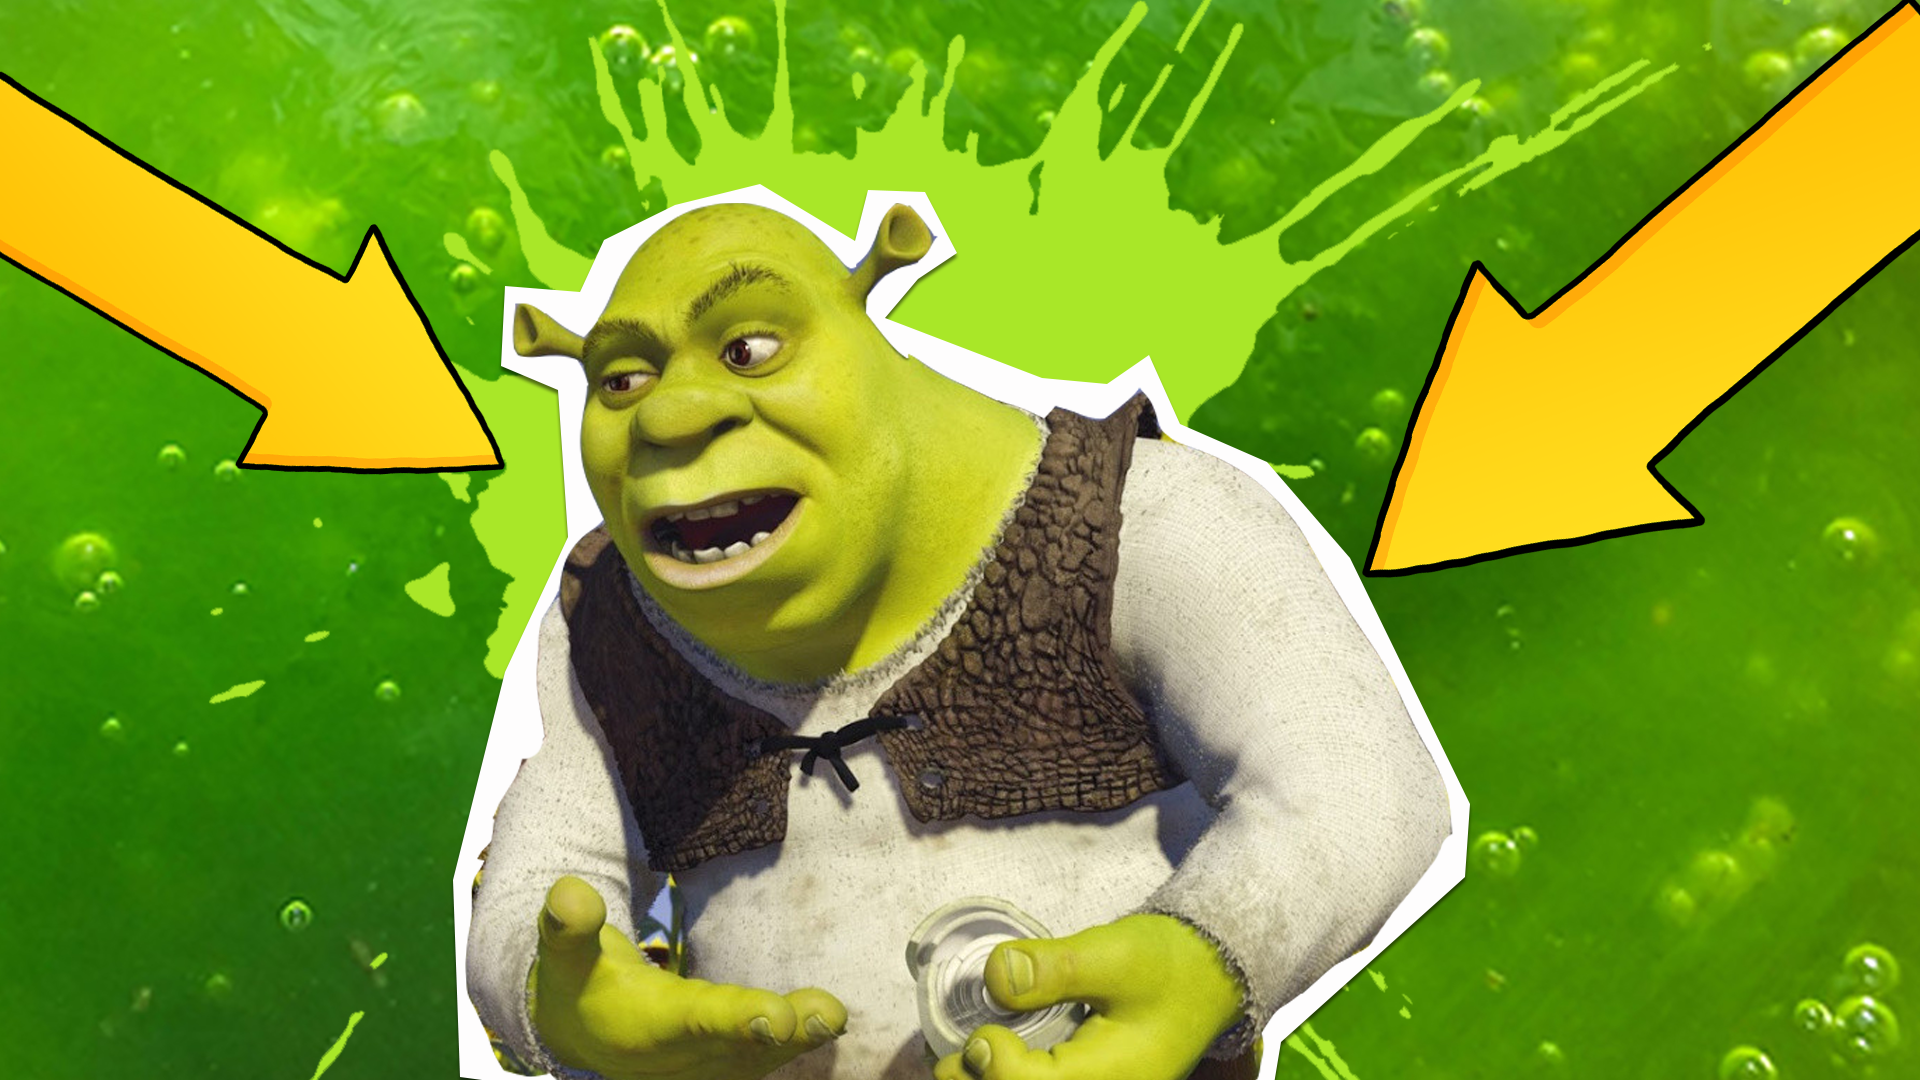 12 facts about Shrek on 20th anniversary of film's release